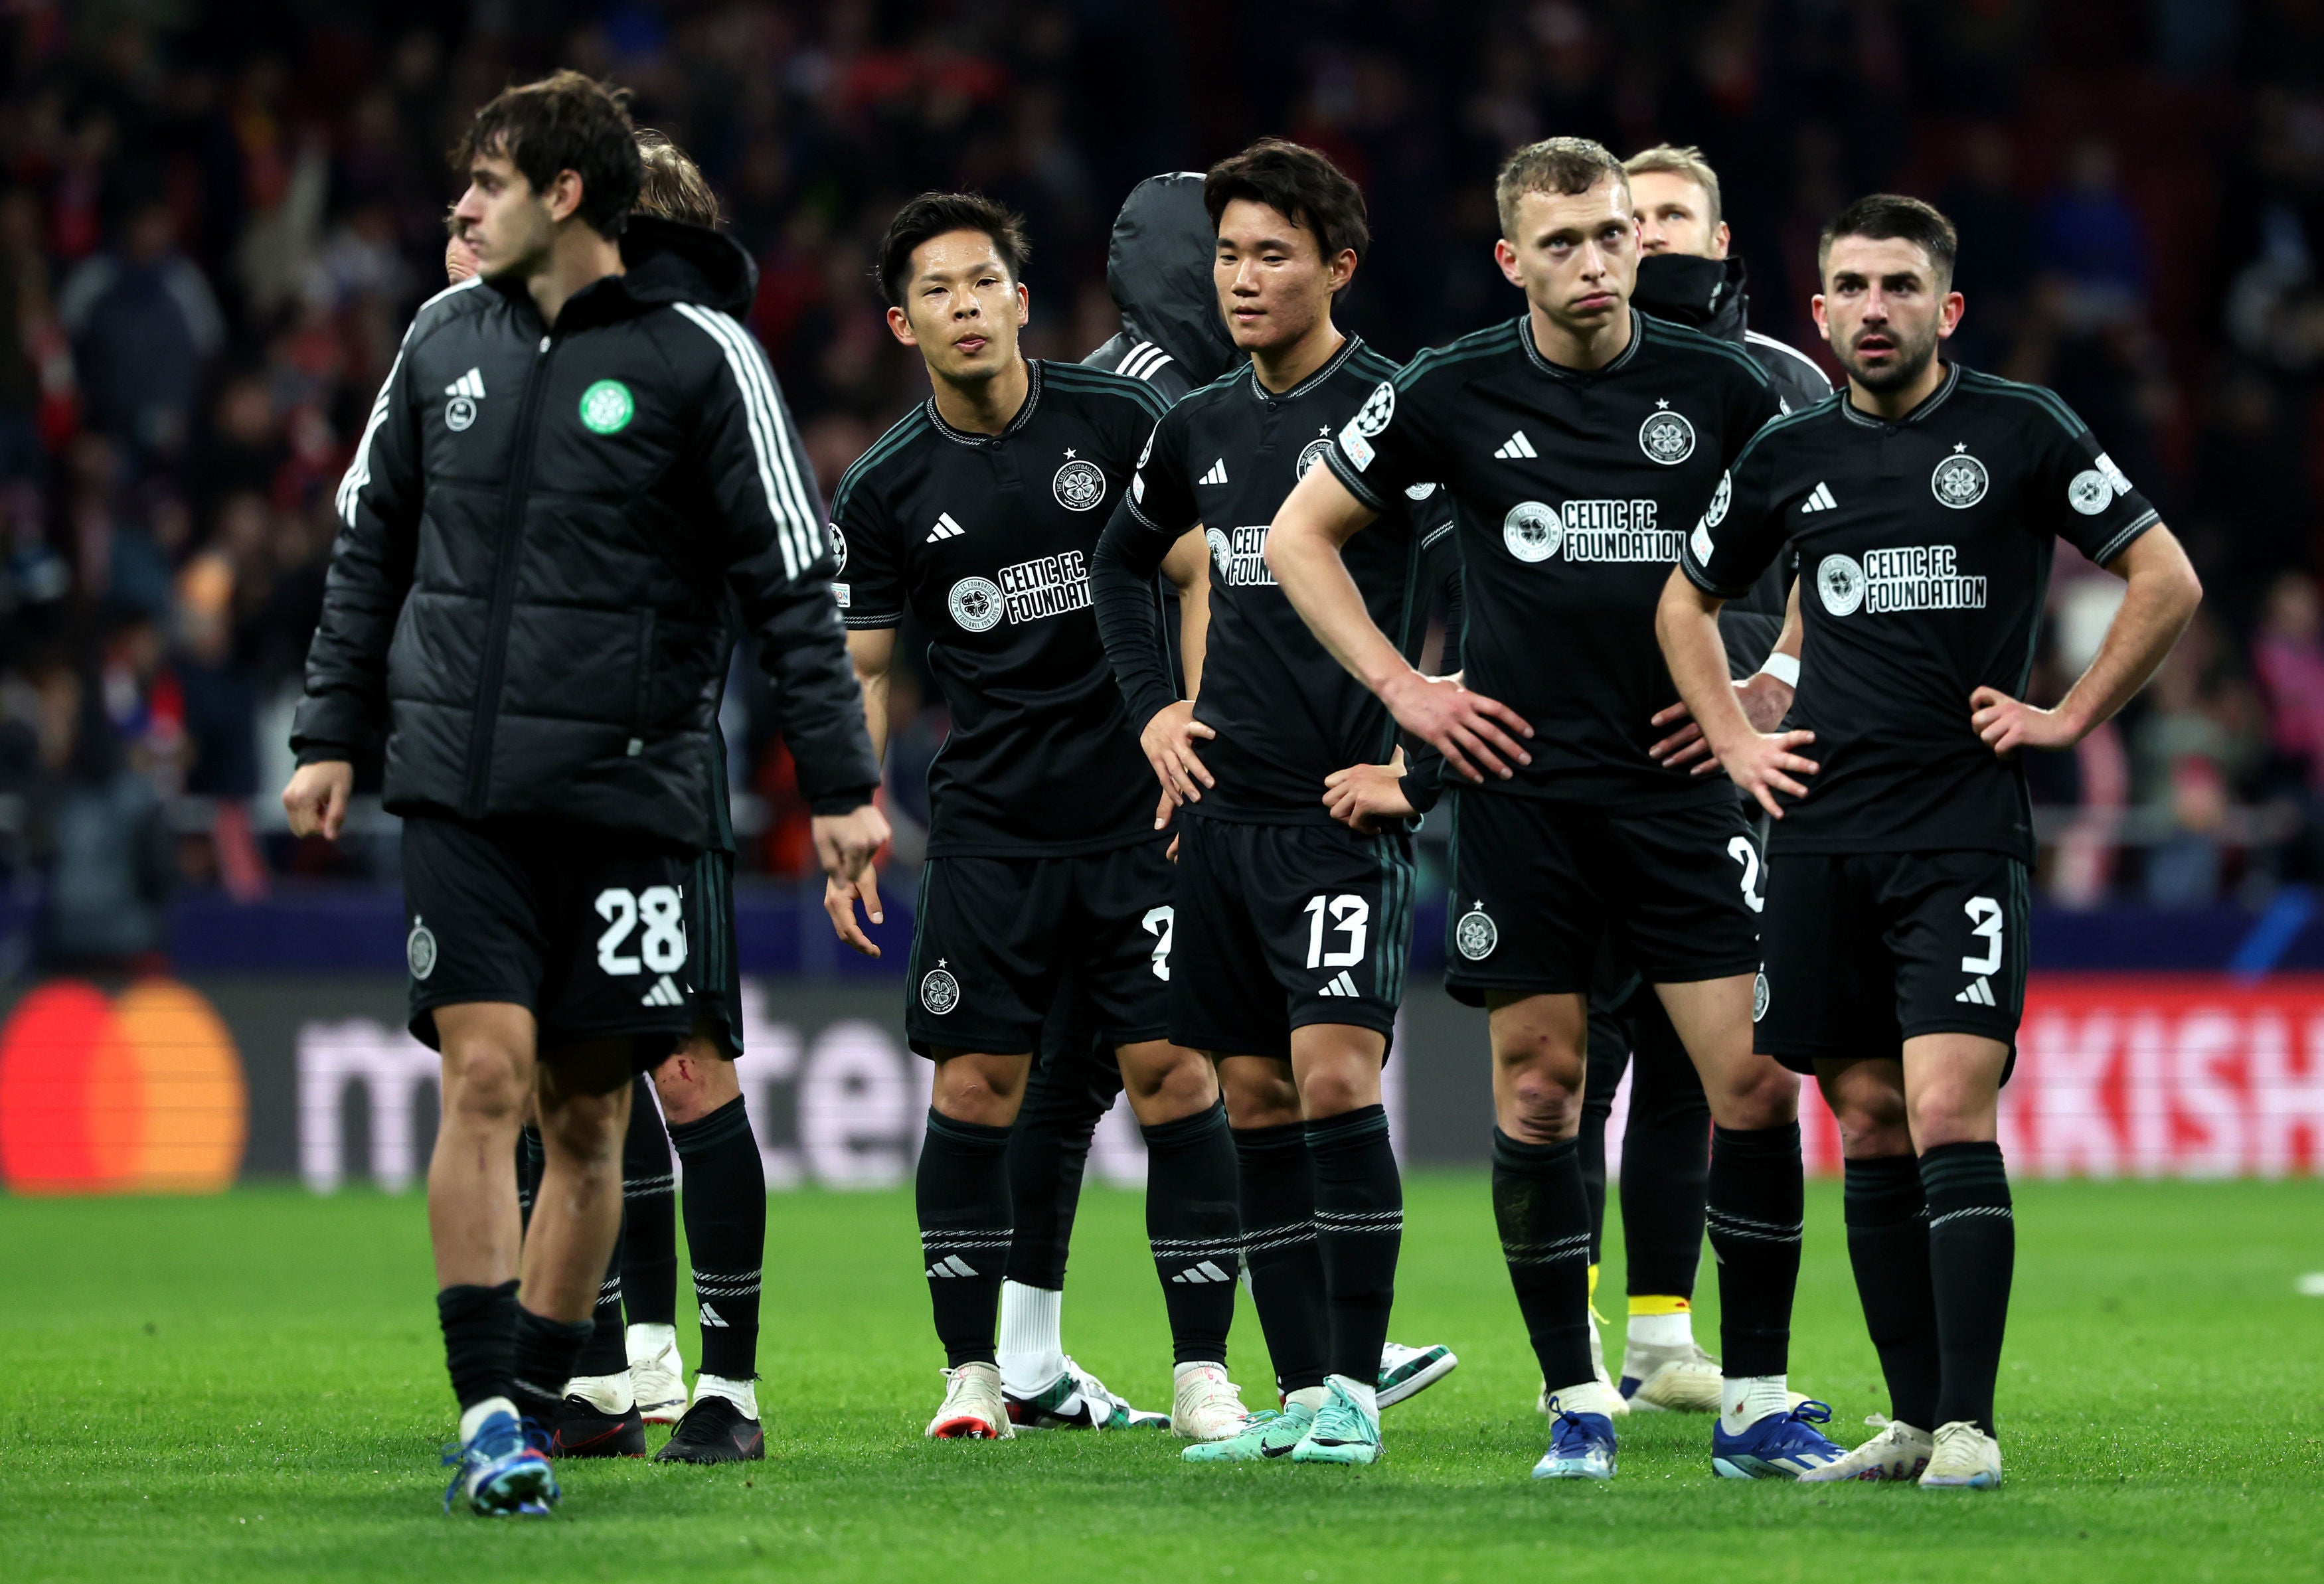 Celtic have been cut adrift in their Champions League group